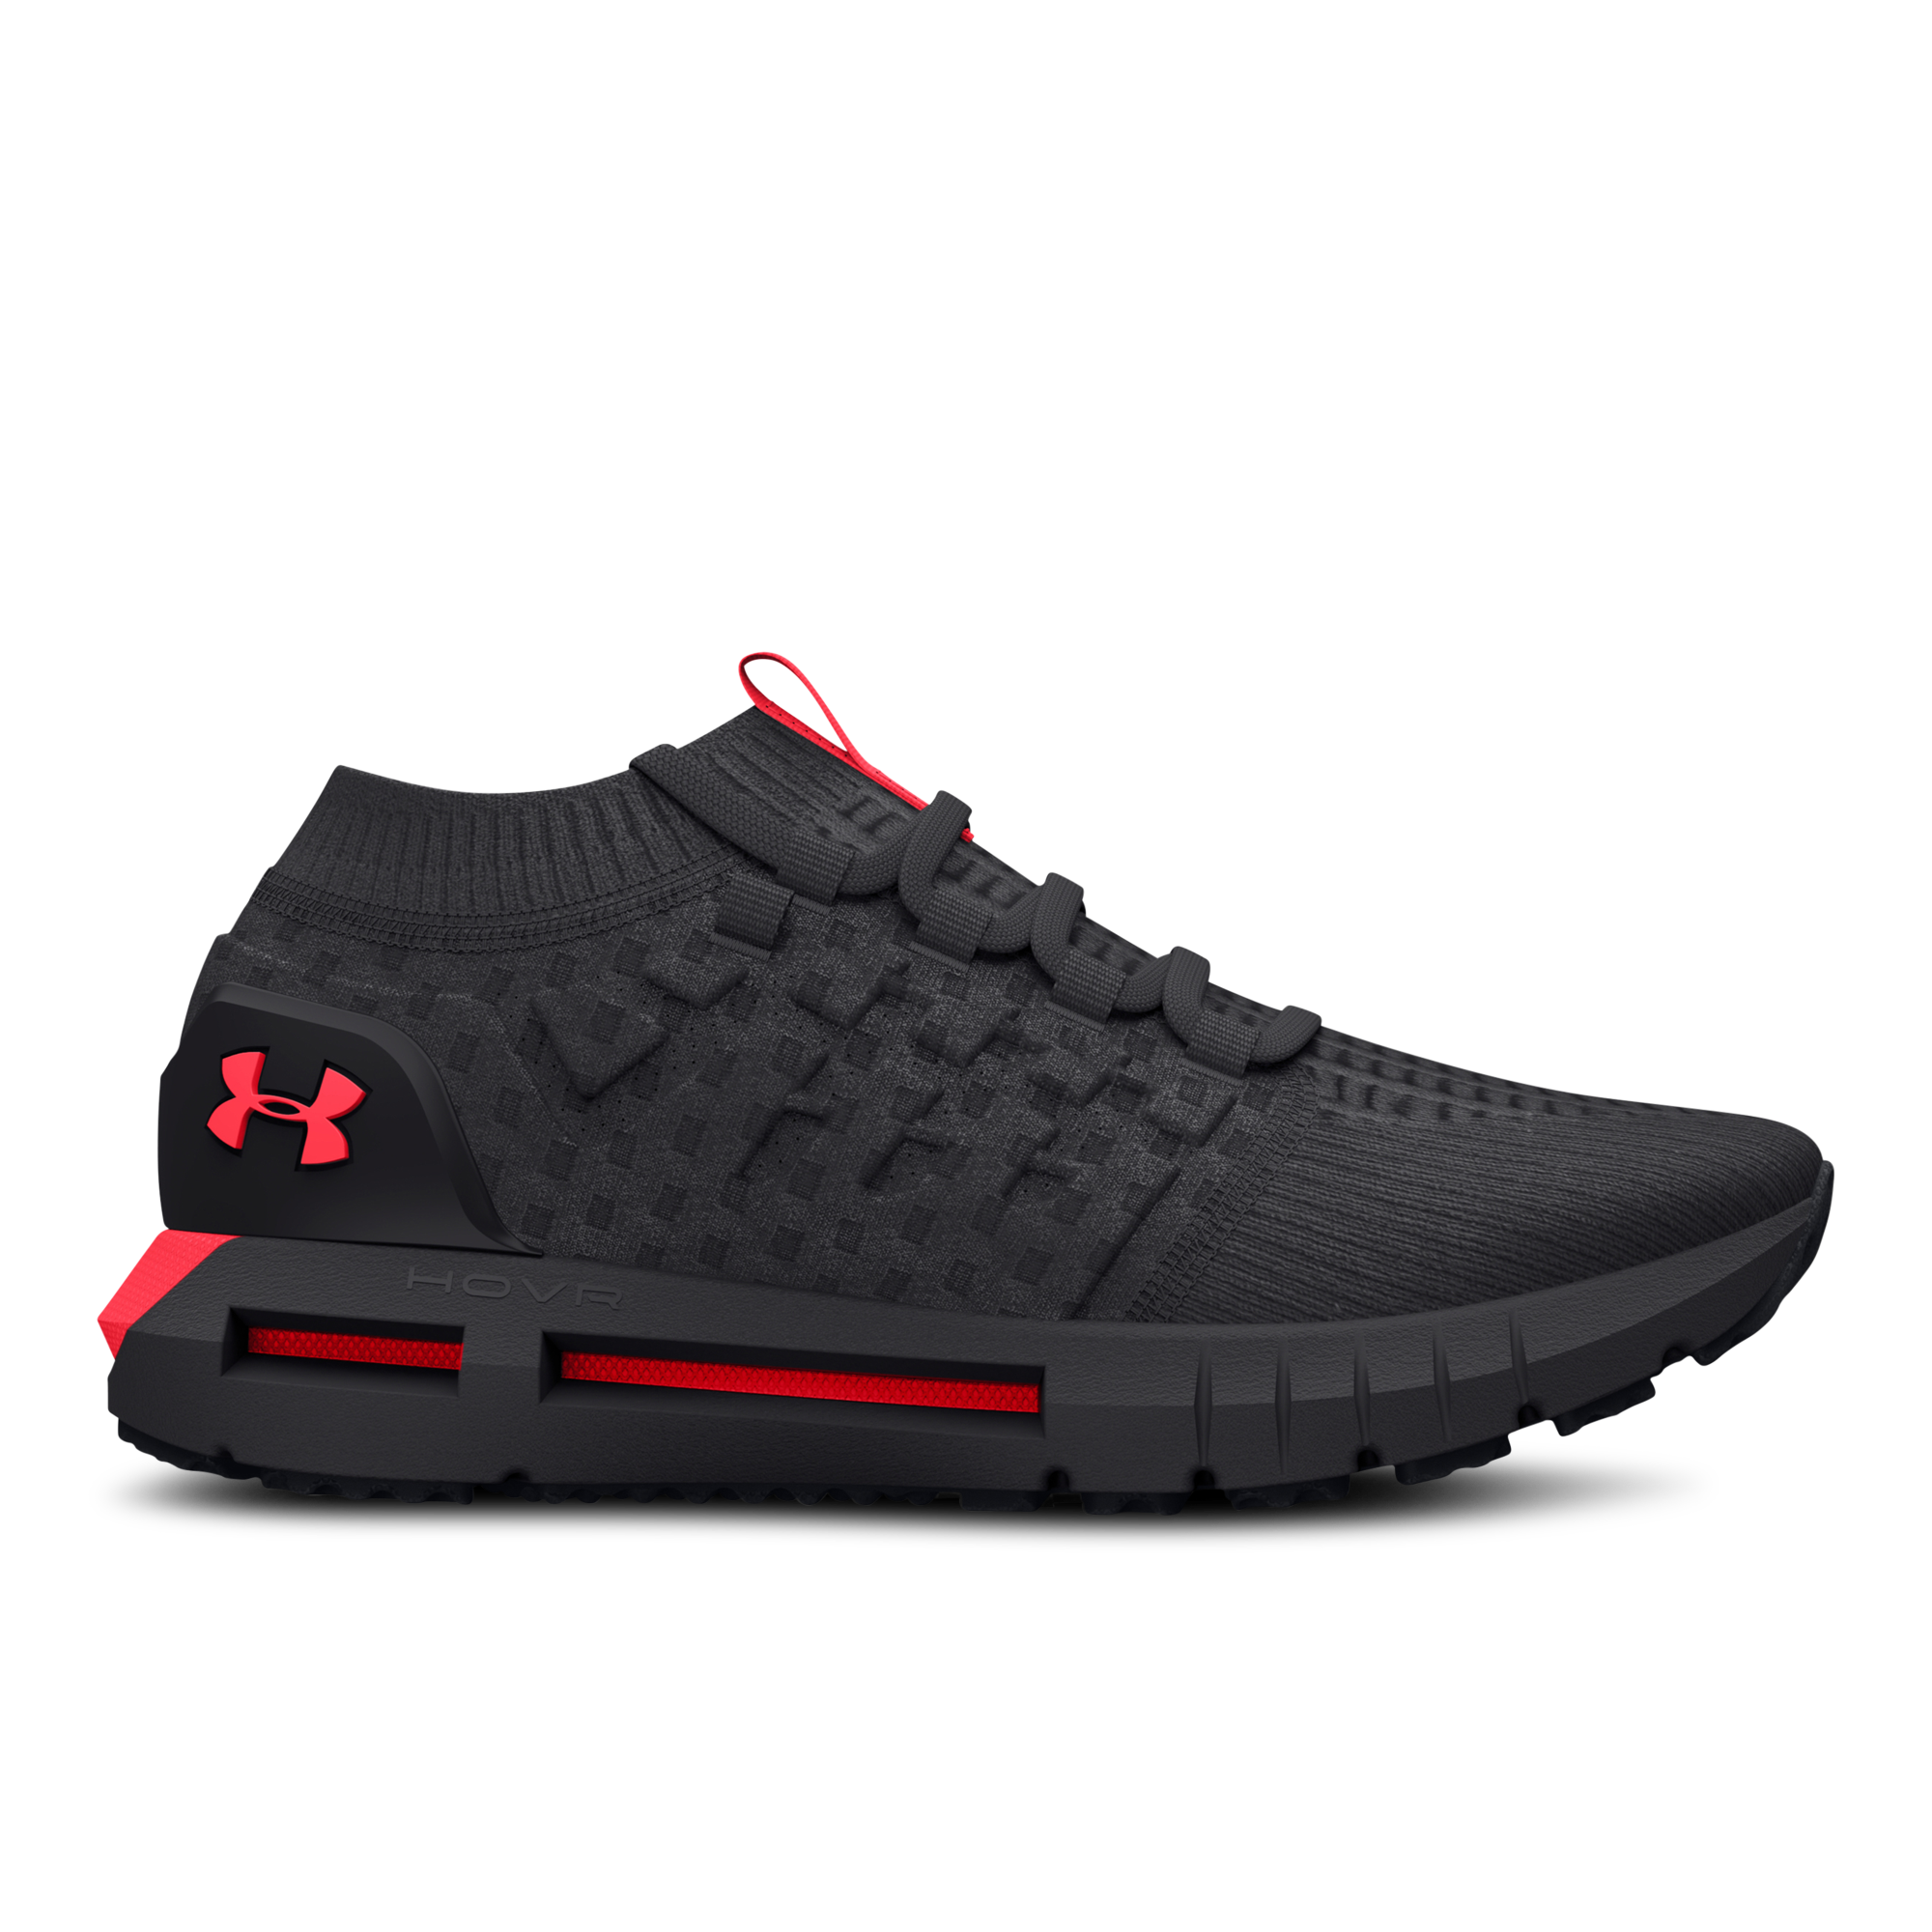 Under Armour, Project Rock 5 Womens, Training Shoes